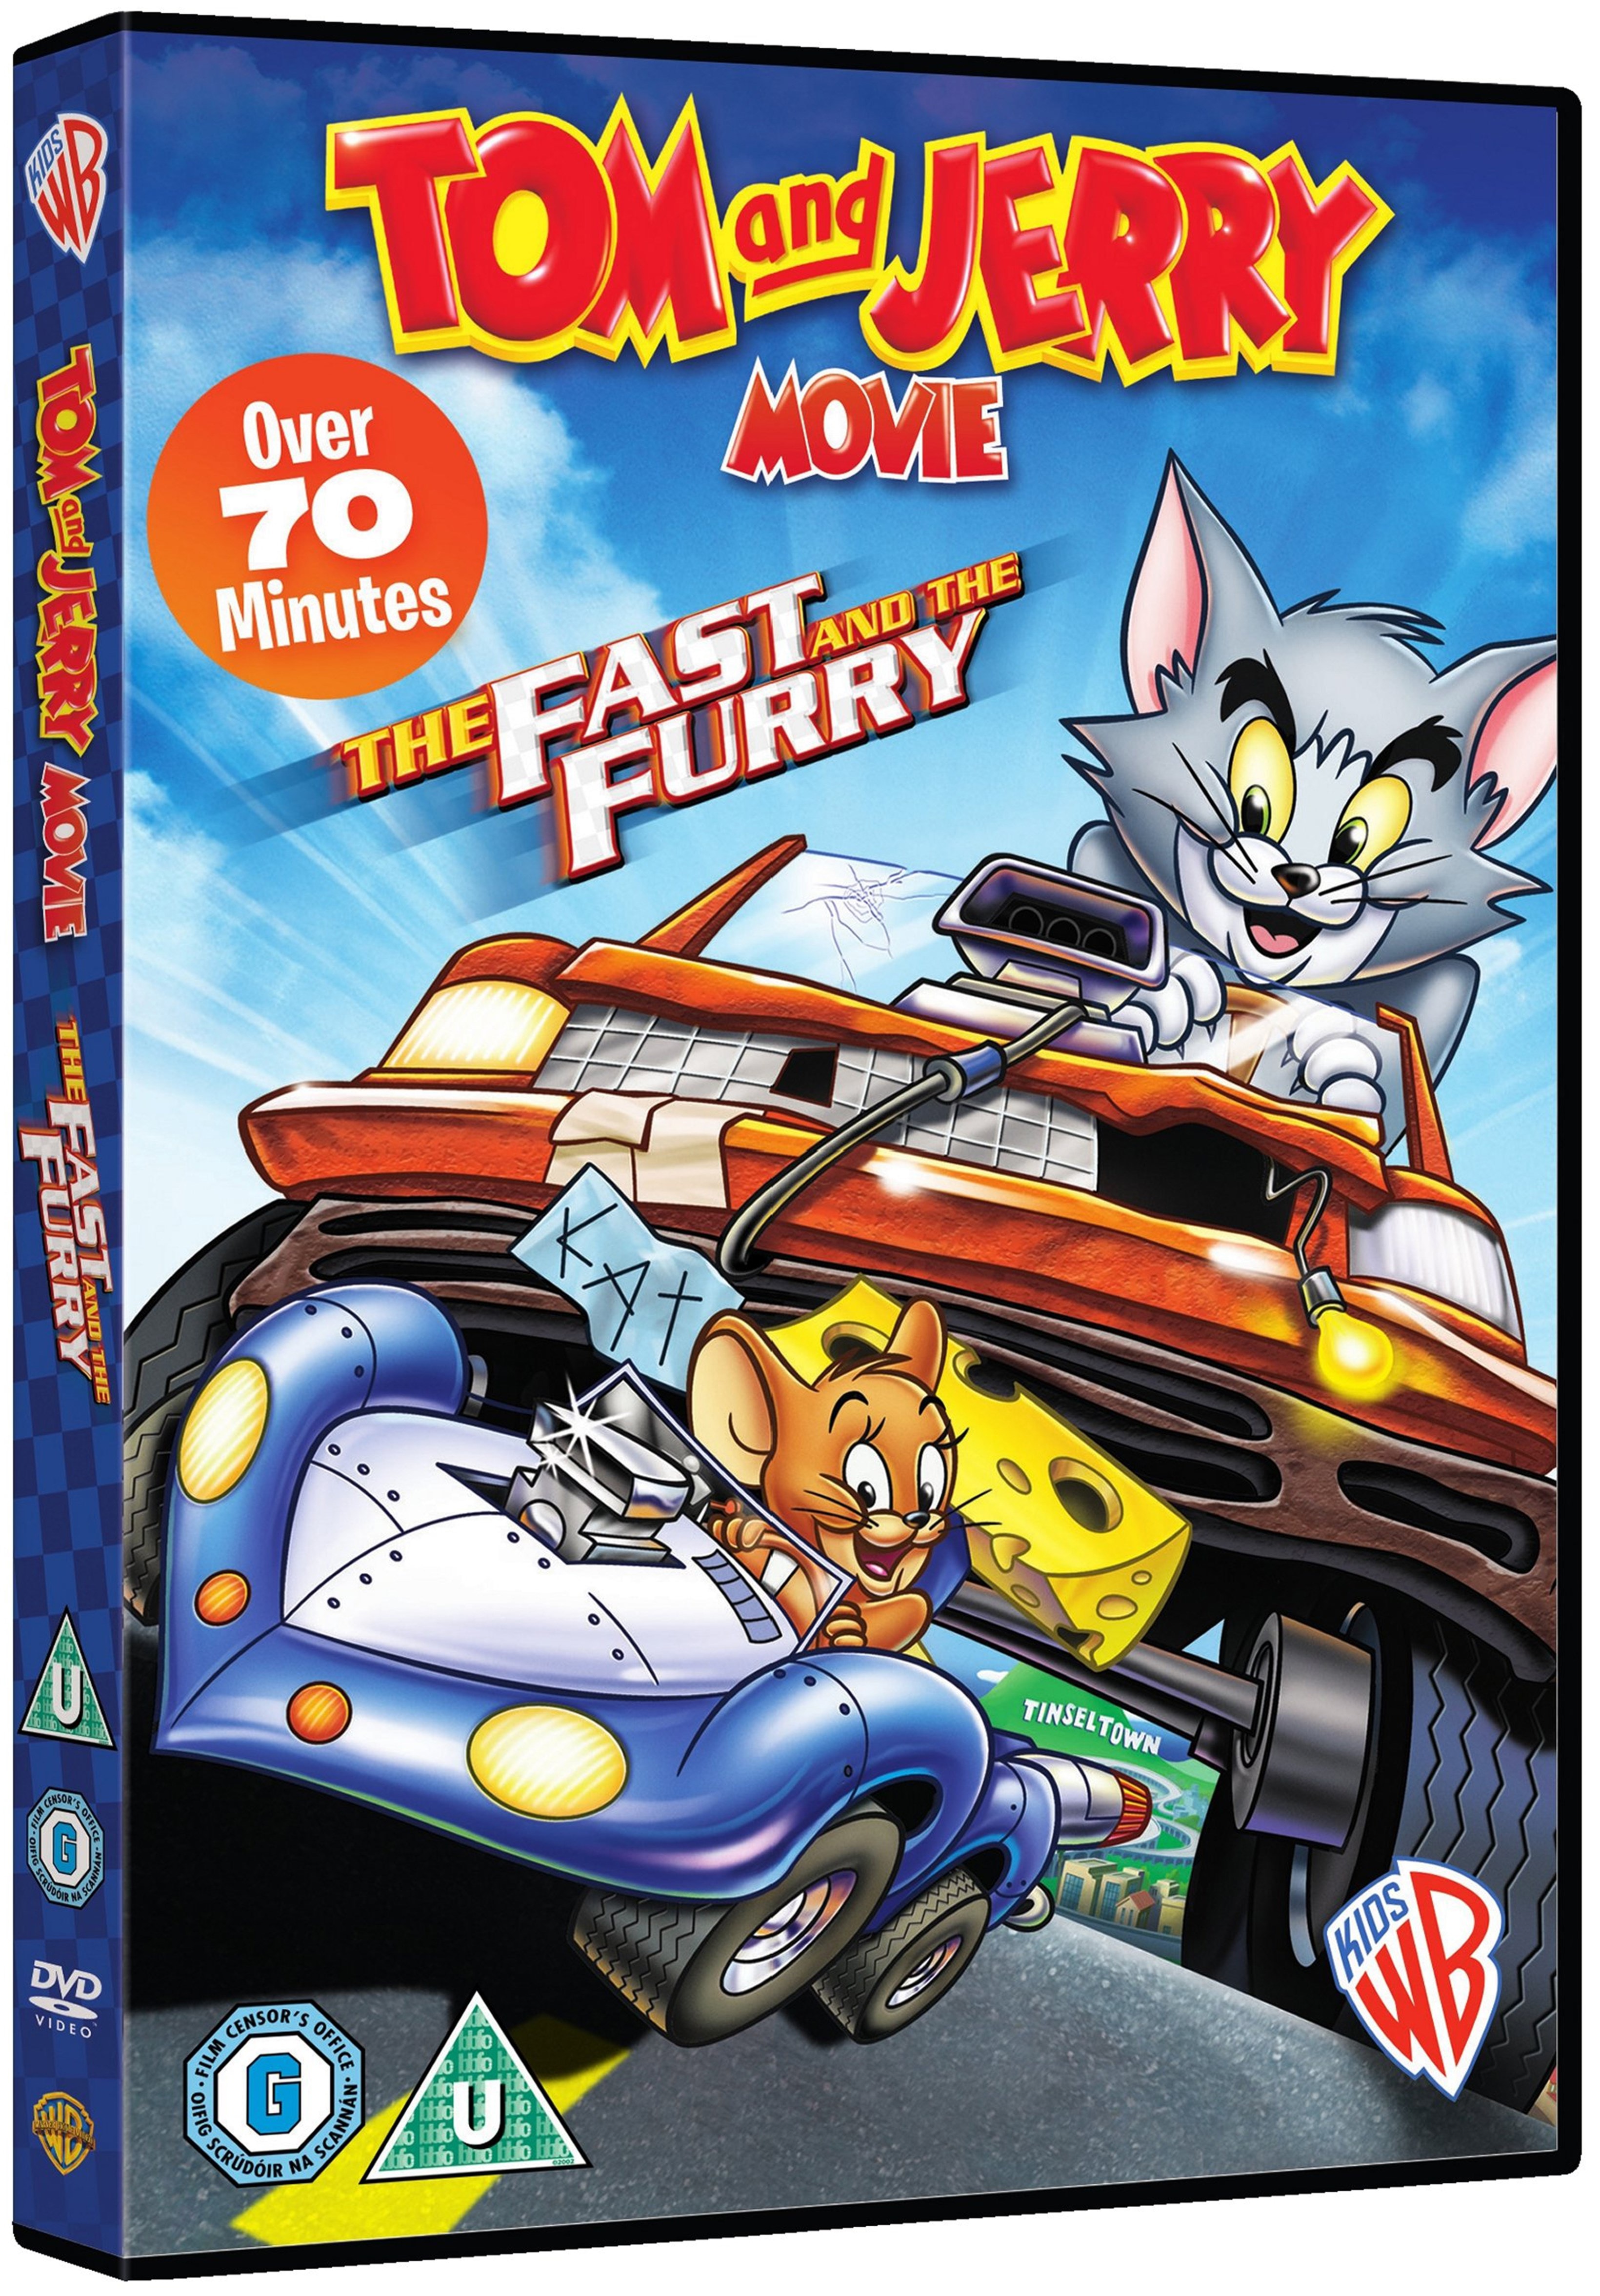 Tom and Jerry: The Fast and the Furry | DVD | Free ...